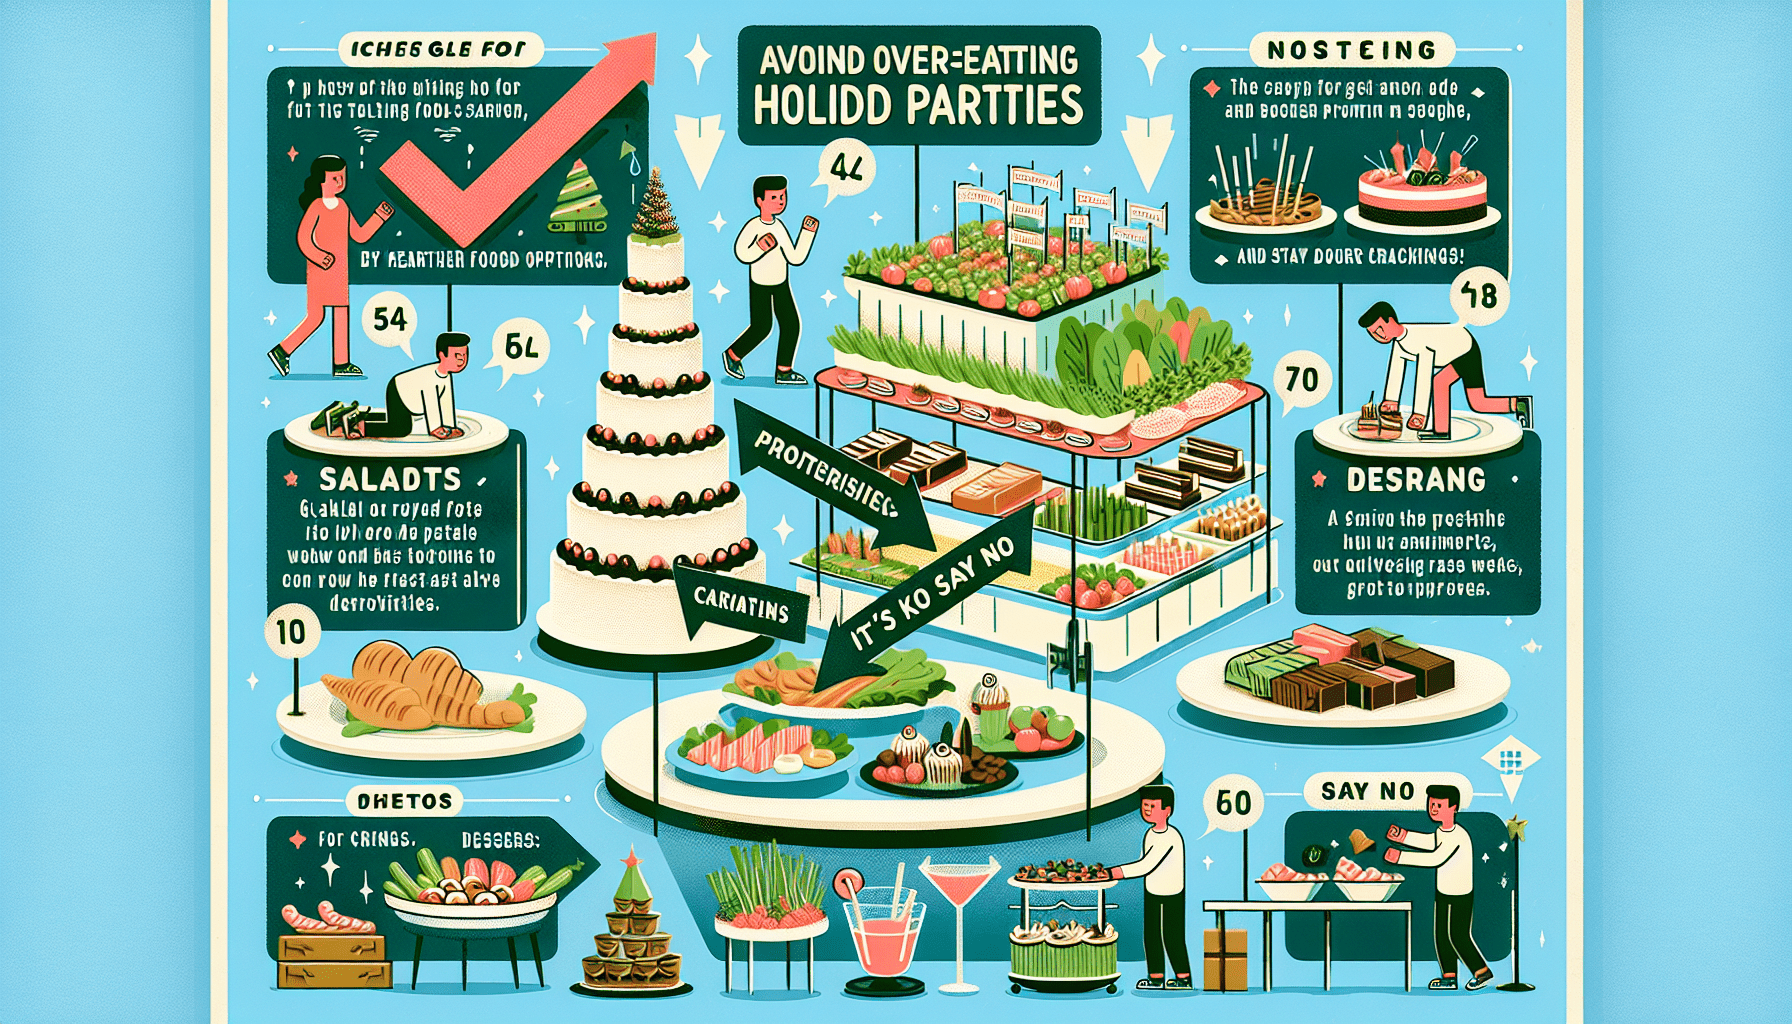 How Can I Avoid Eating Too Much When Im At A Holiday Party?